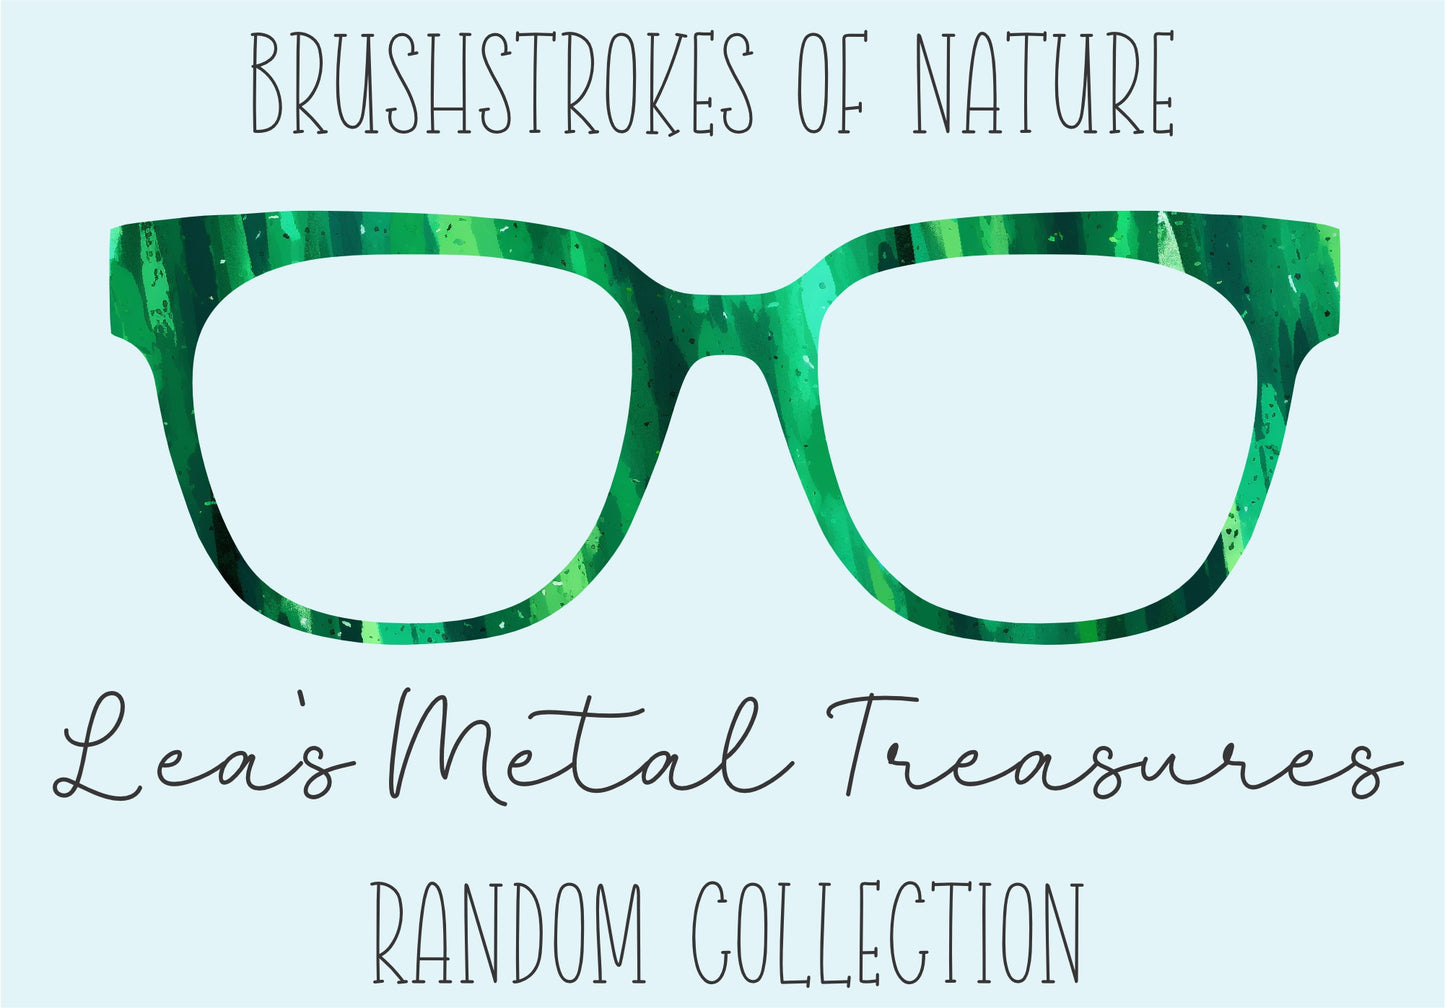 BRUSHSTROKES OF NATURE Eyewear Frame Toppers COMES WITH MAGNETS